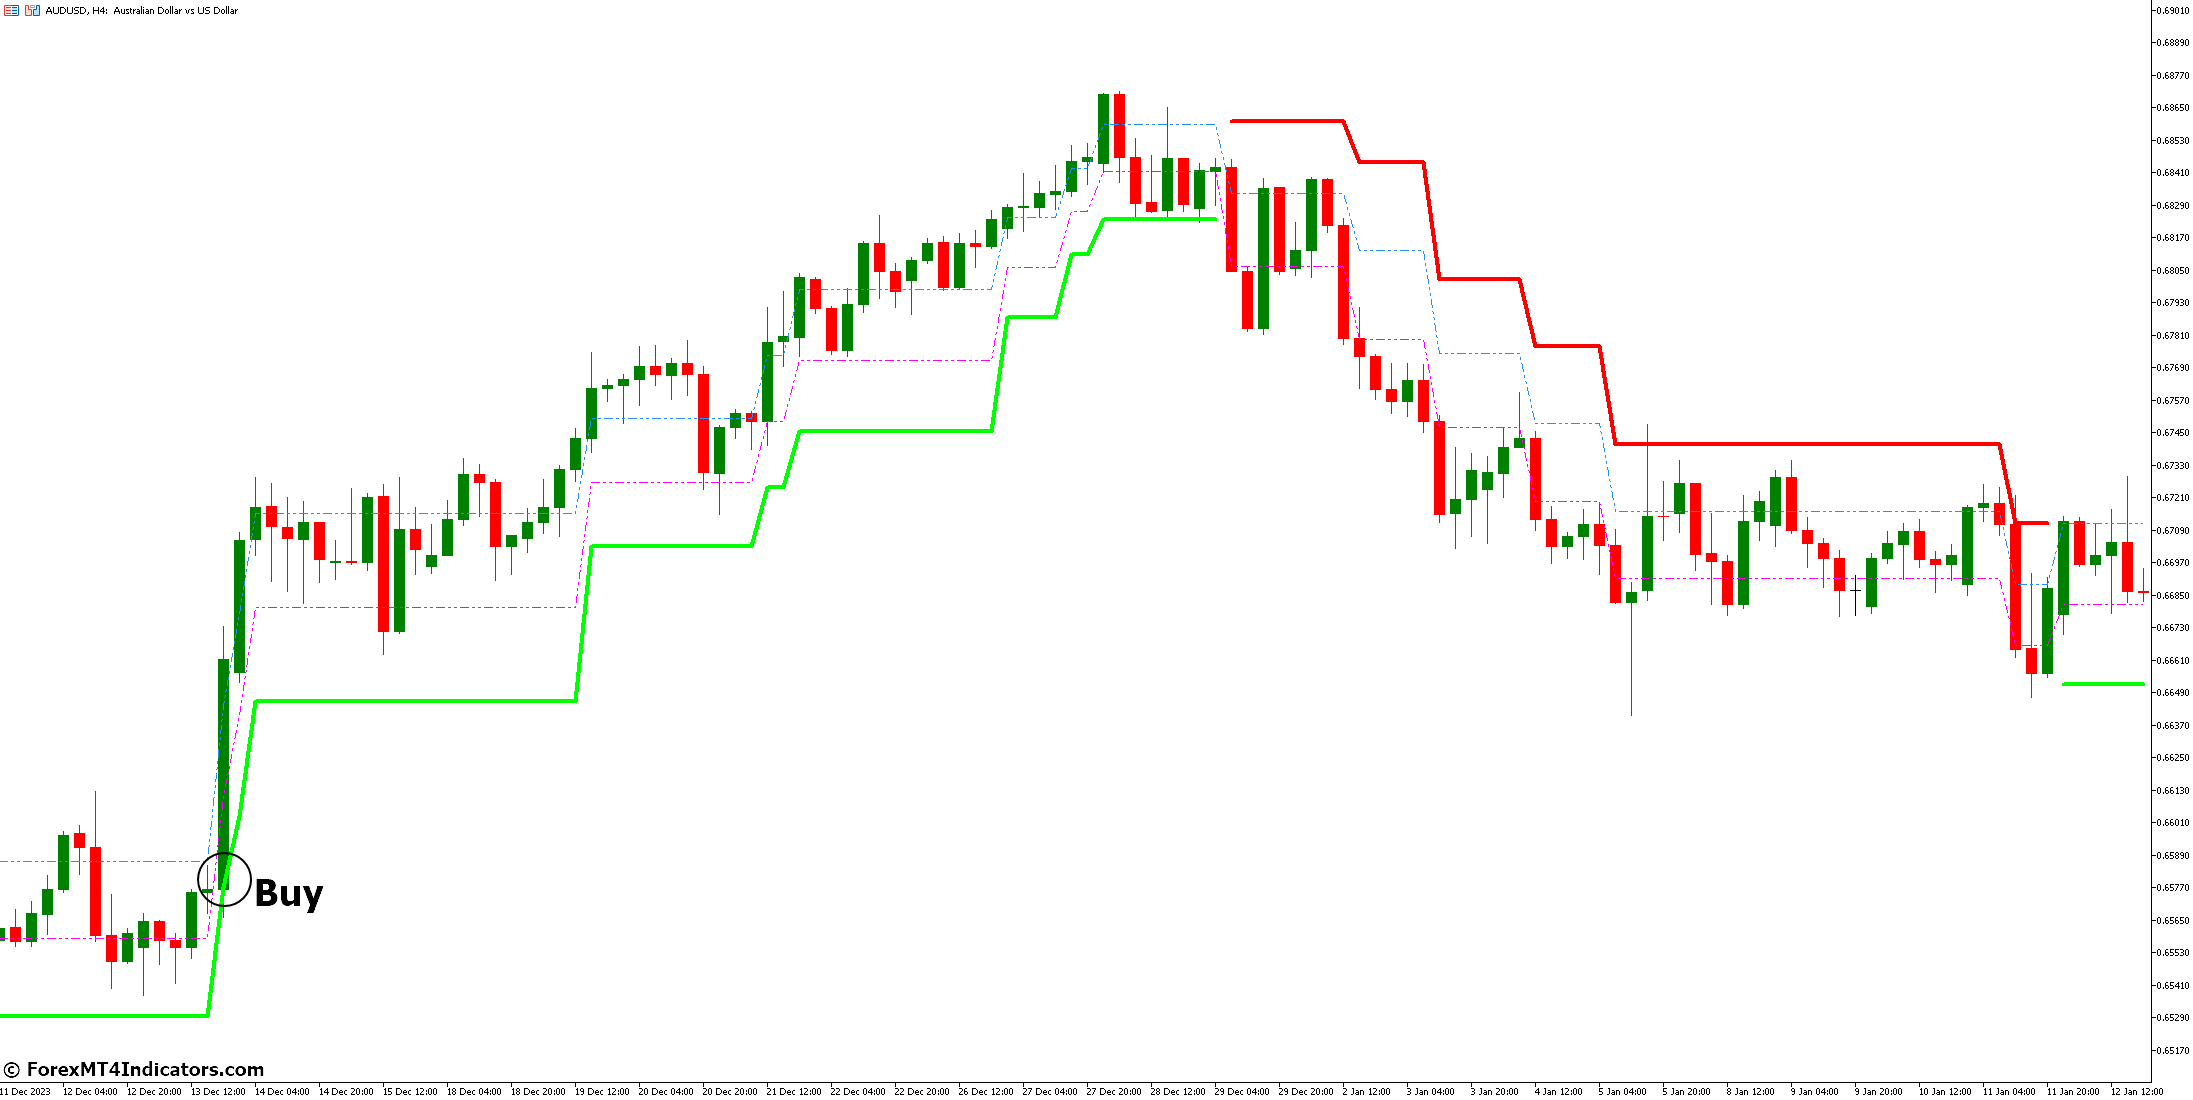 How to Trade with Adaptive Renko Indicator - Buy Entry